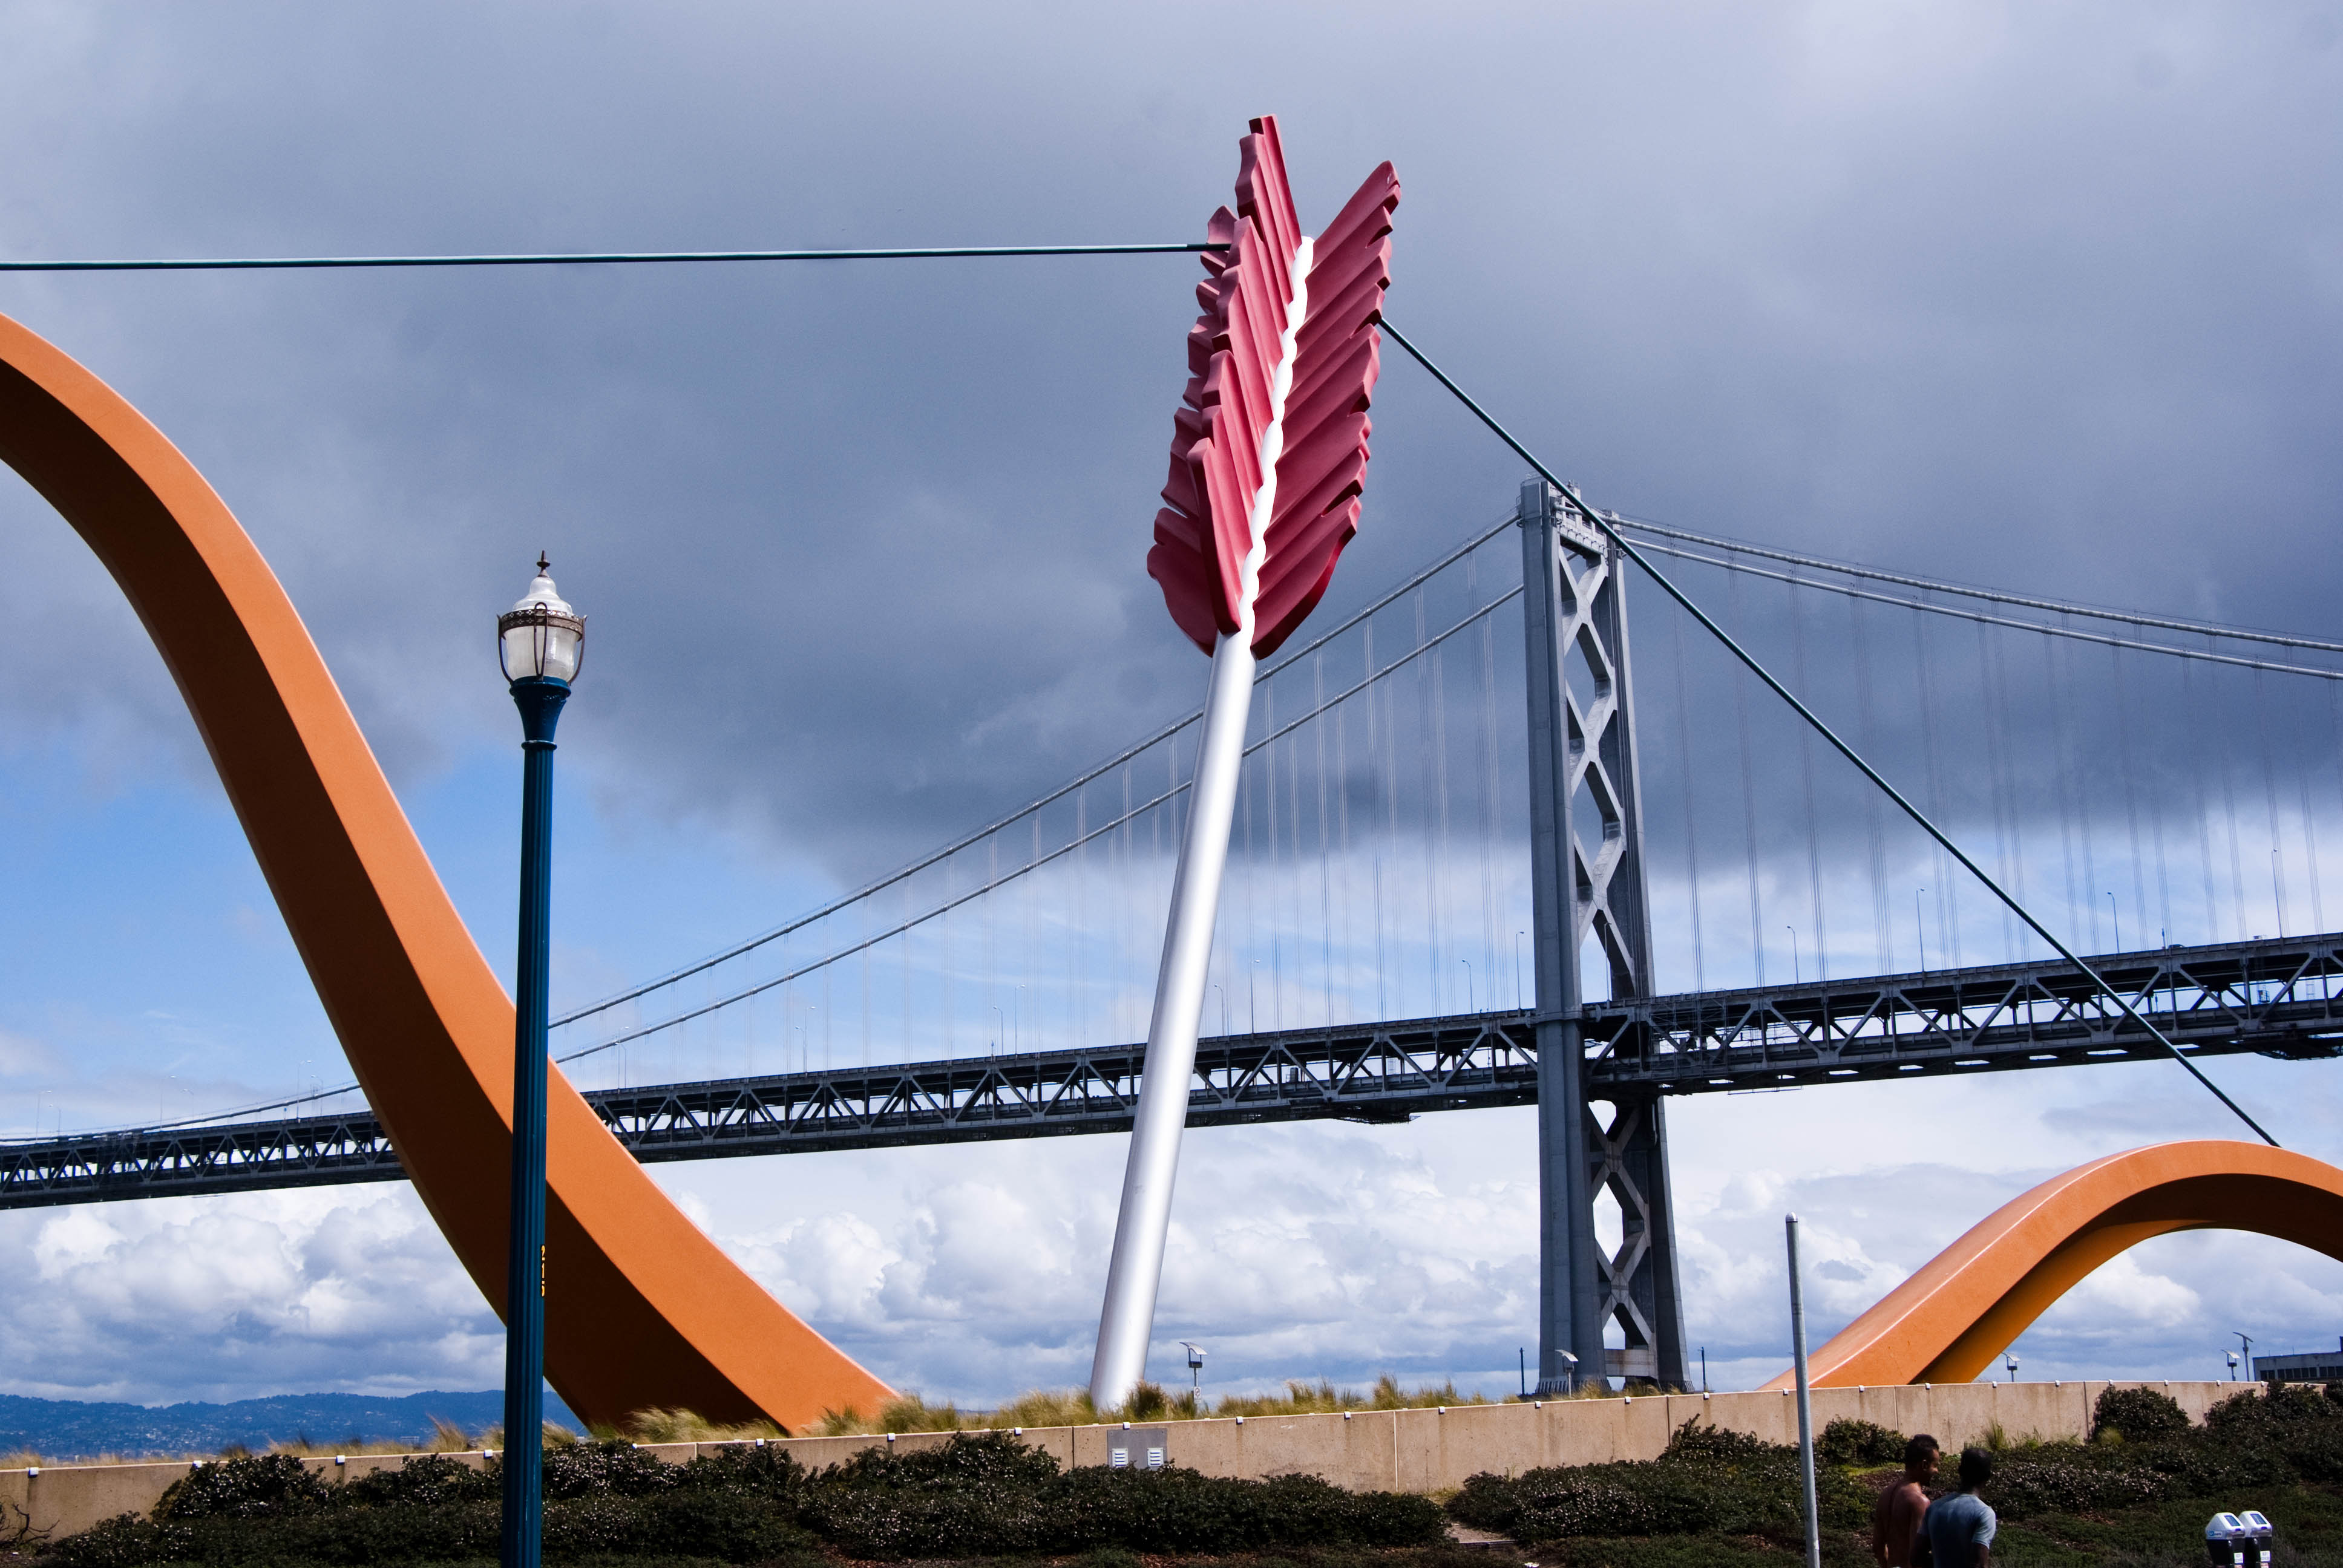 15178 Clouds loom over Cupid's Span (bow and arrow) along the Embarcadero